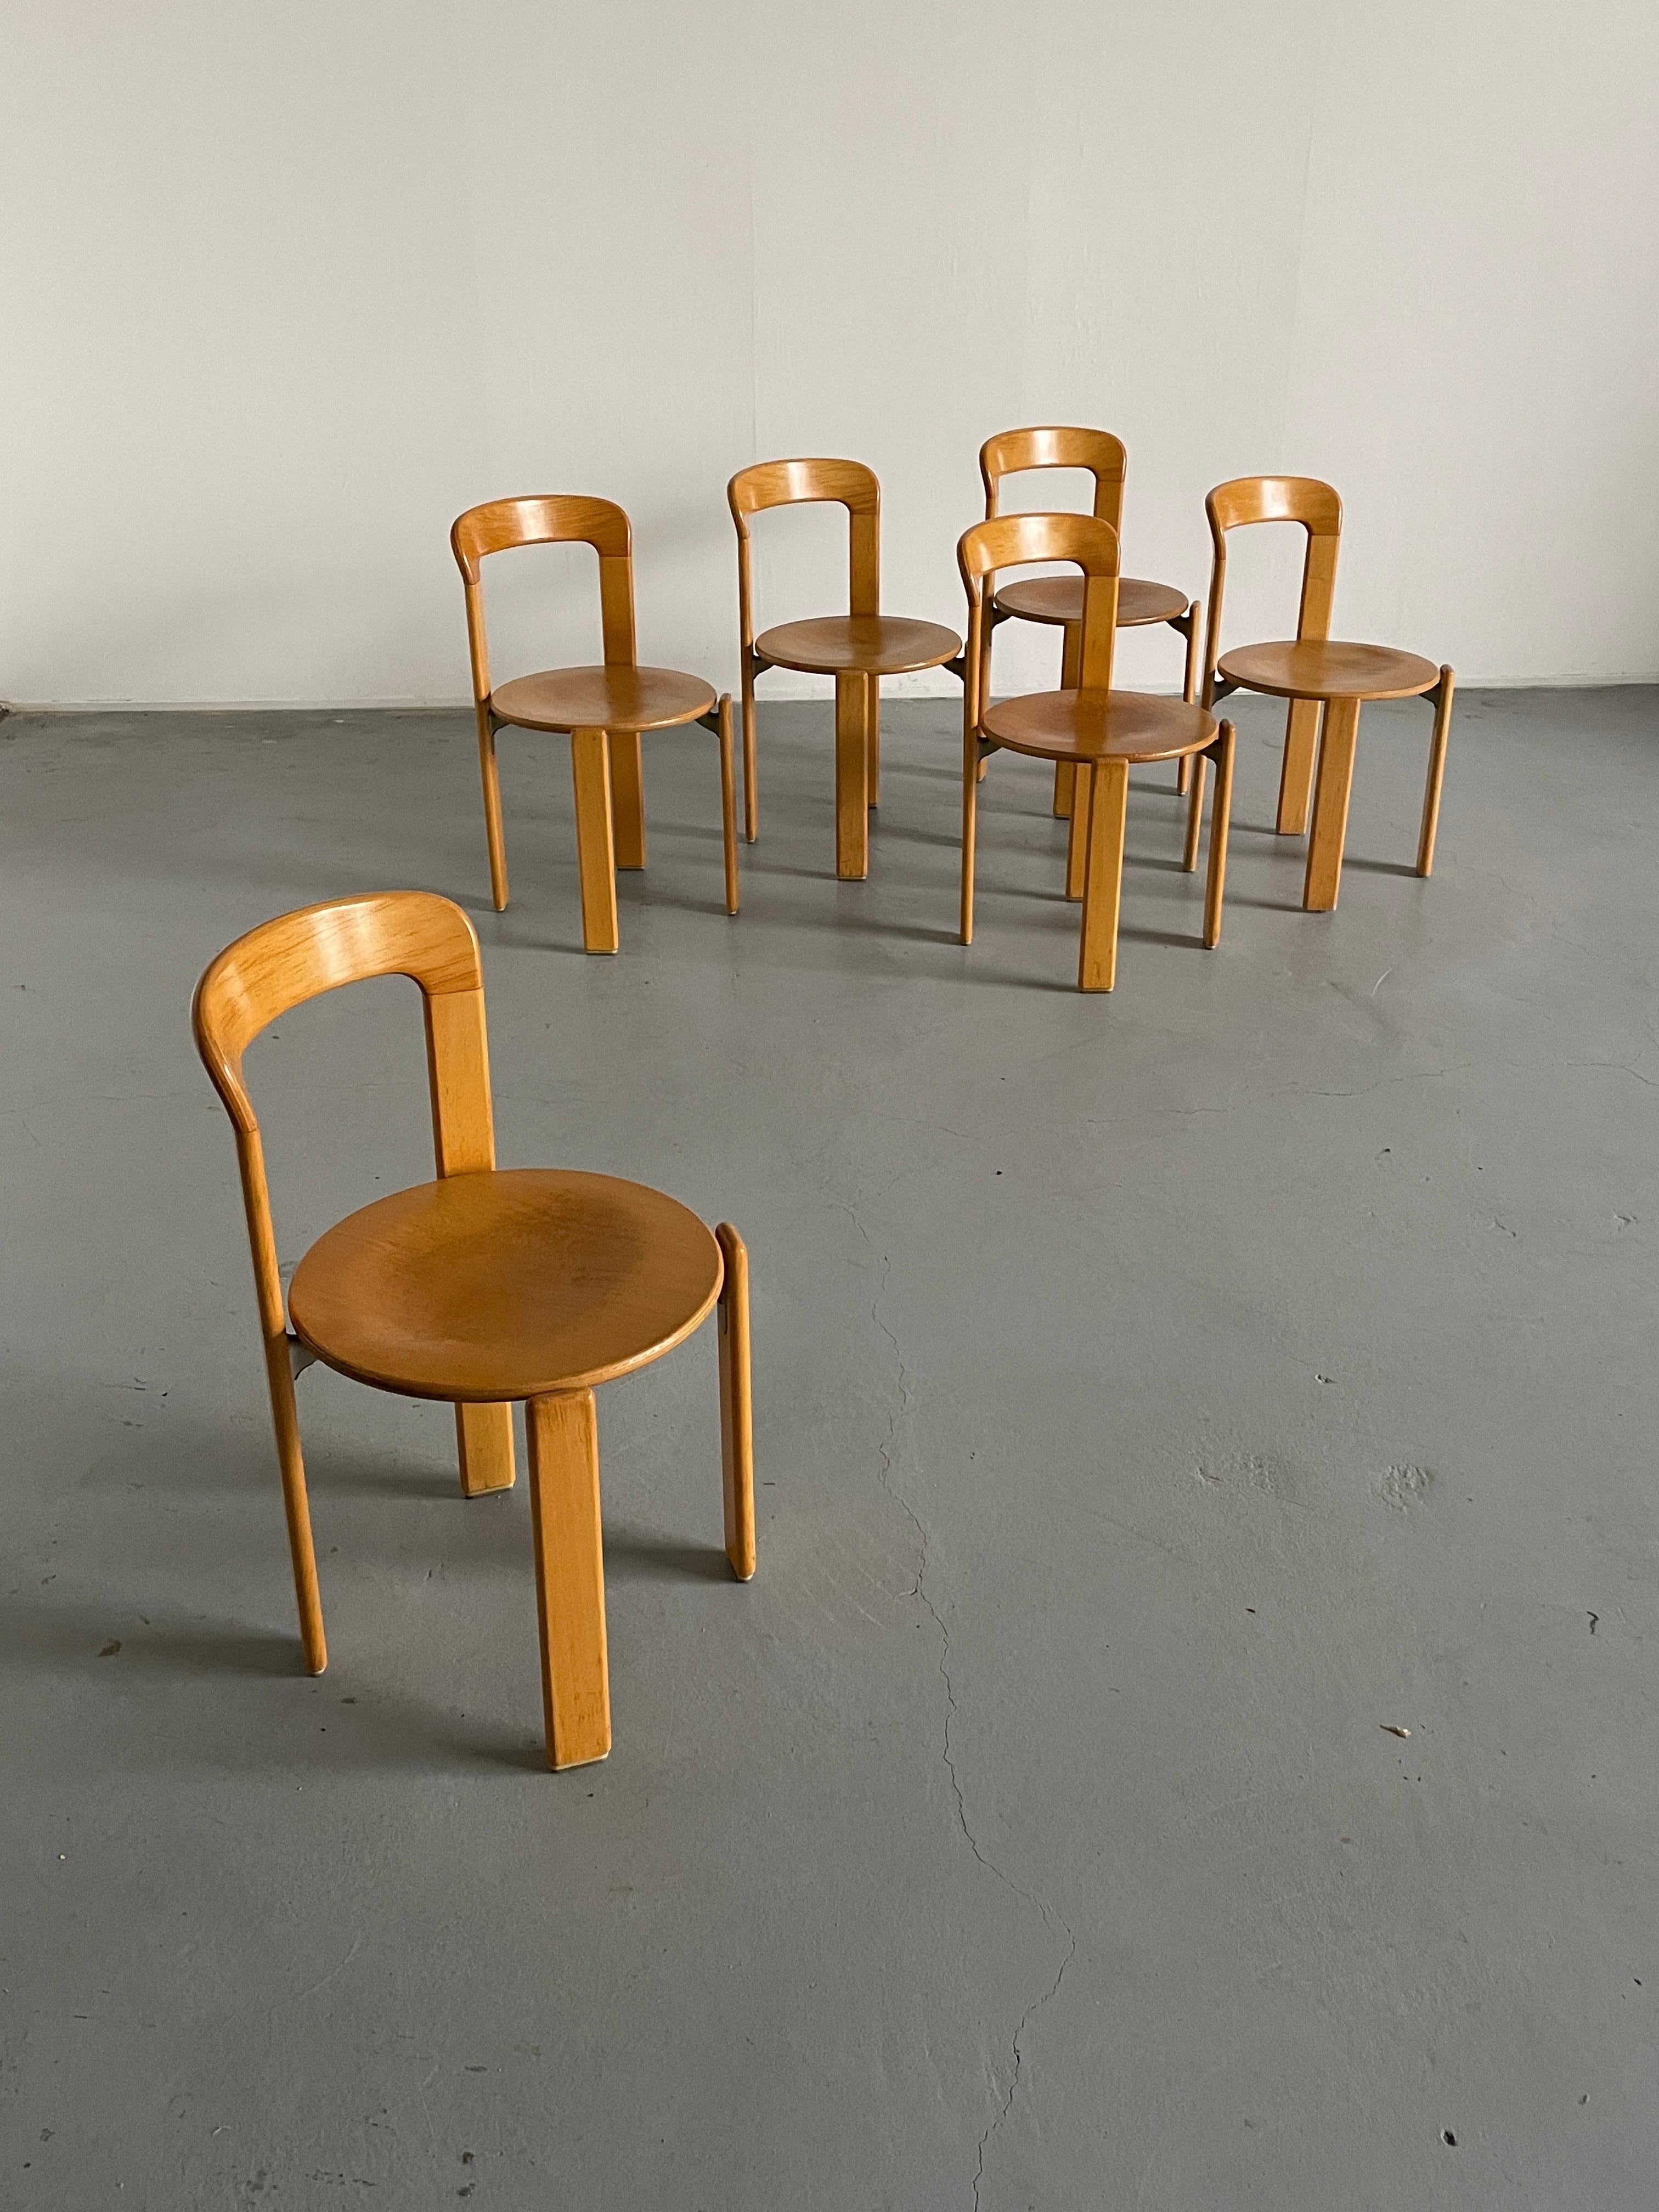 Set of six Mid-Century-Modern dining chairs designed by Bruno Rey in the 1970s. 
Iconic design, produced by the well known Germany manufacturer Kusch+Co in the early 1990s.

Rare natural wood edition.

The dining chairs were made of solid beech and